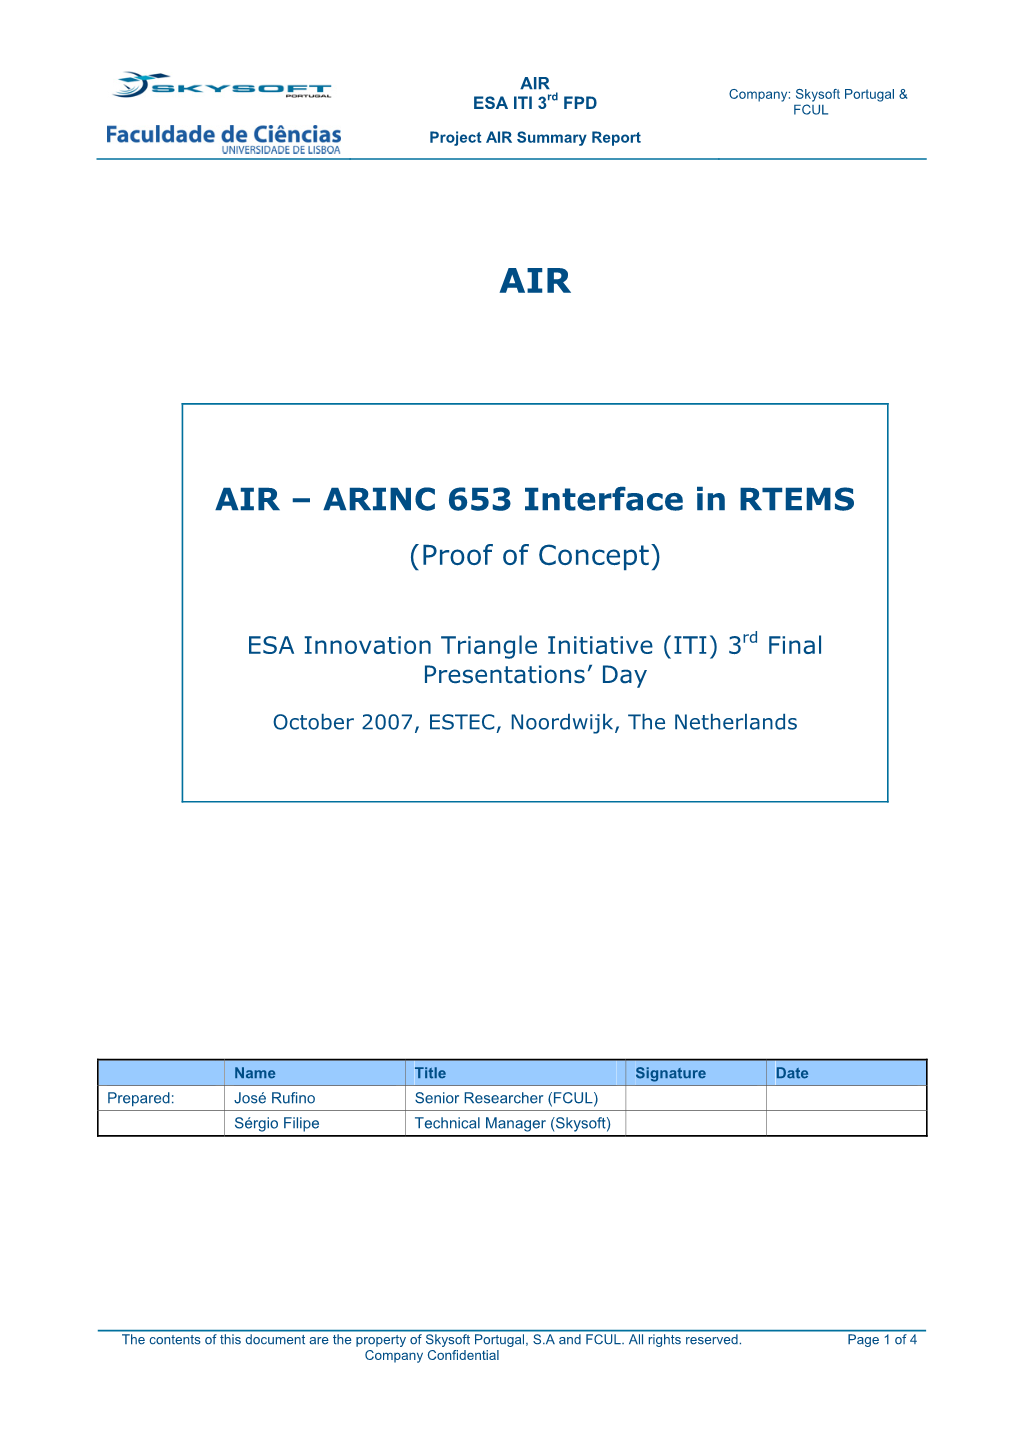 AIR – ARINC 653 Interface in RTEMS (Proof of Concept)